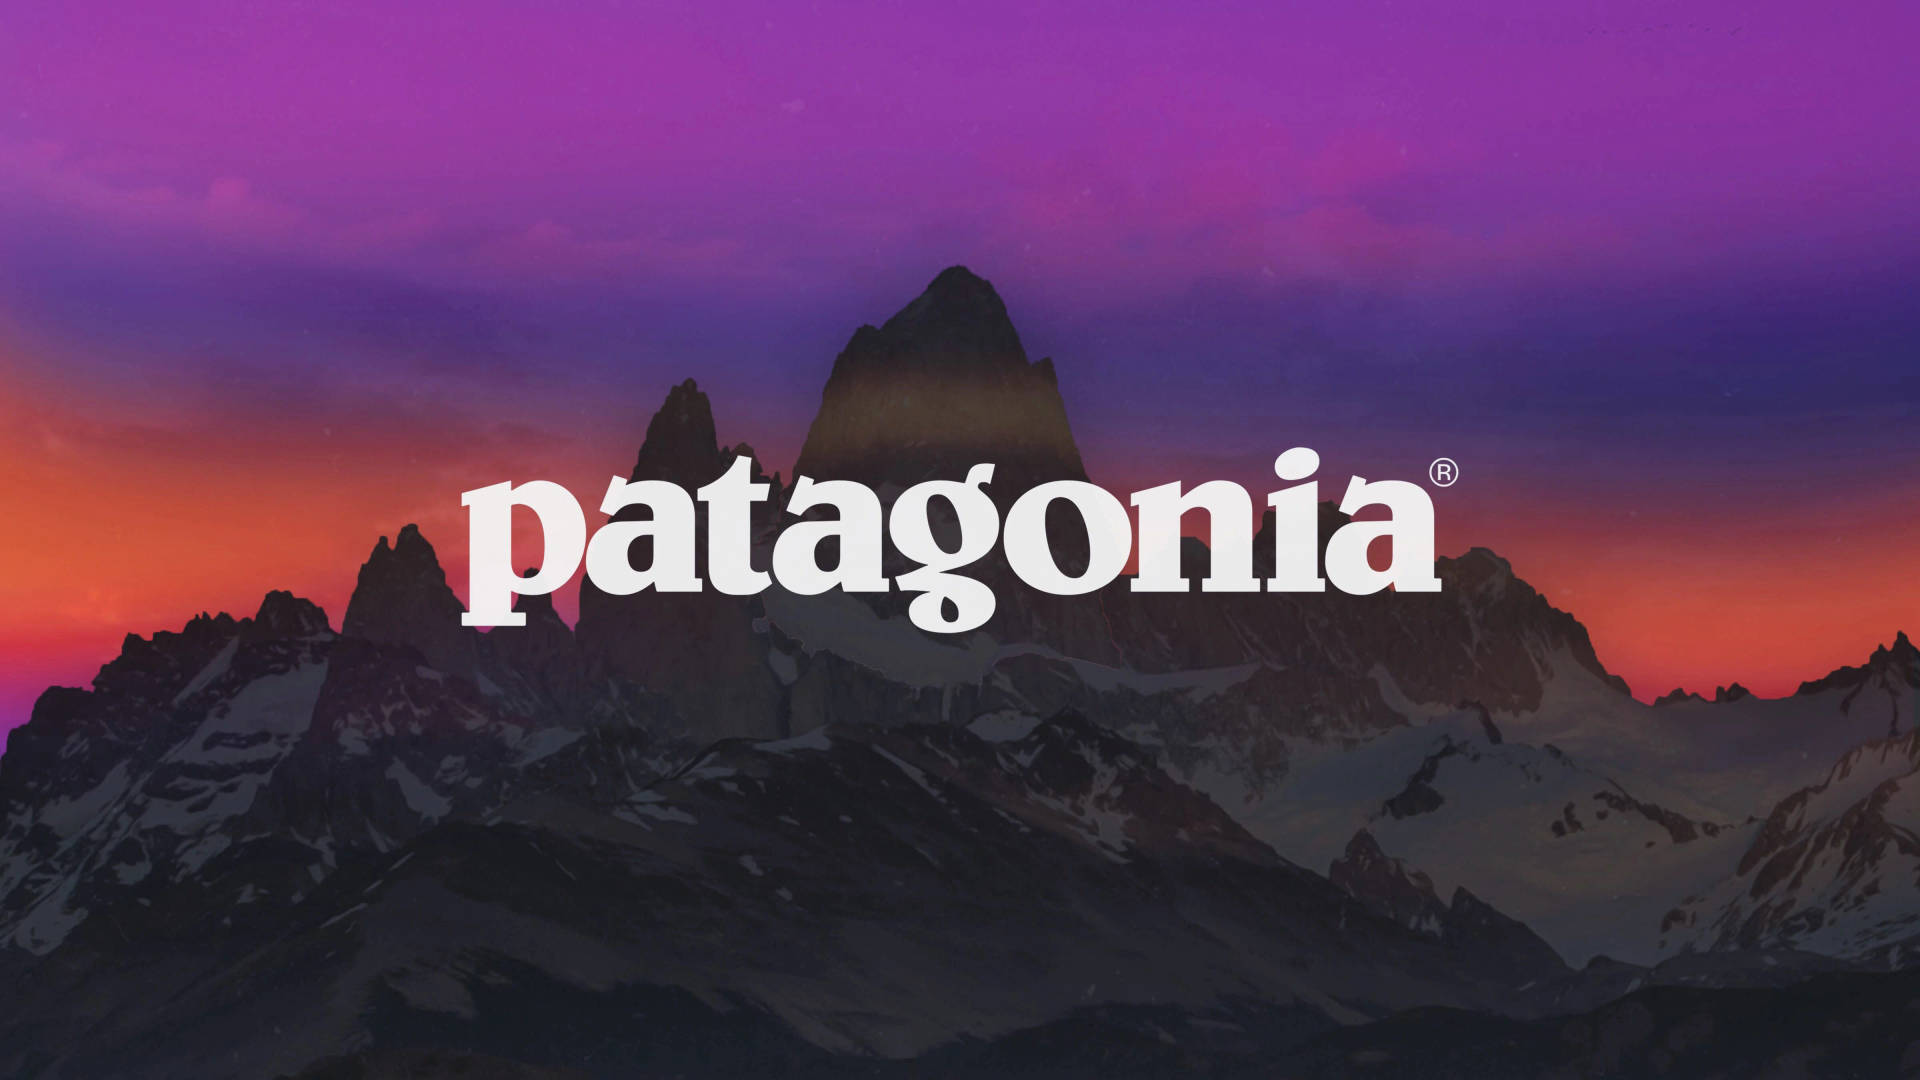 Iconic Patagonia Logo In High Resolution Wallpaper